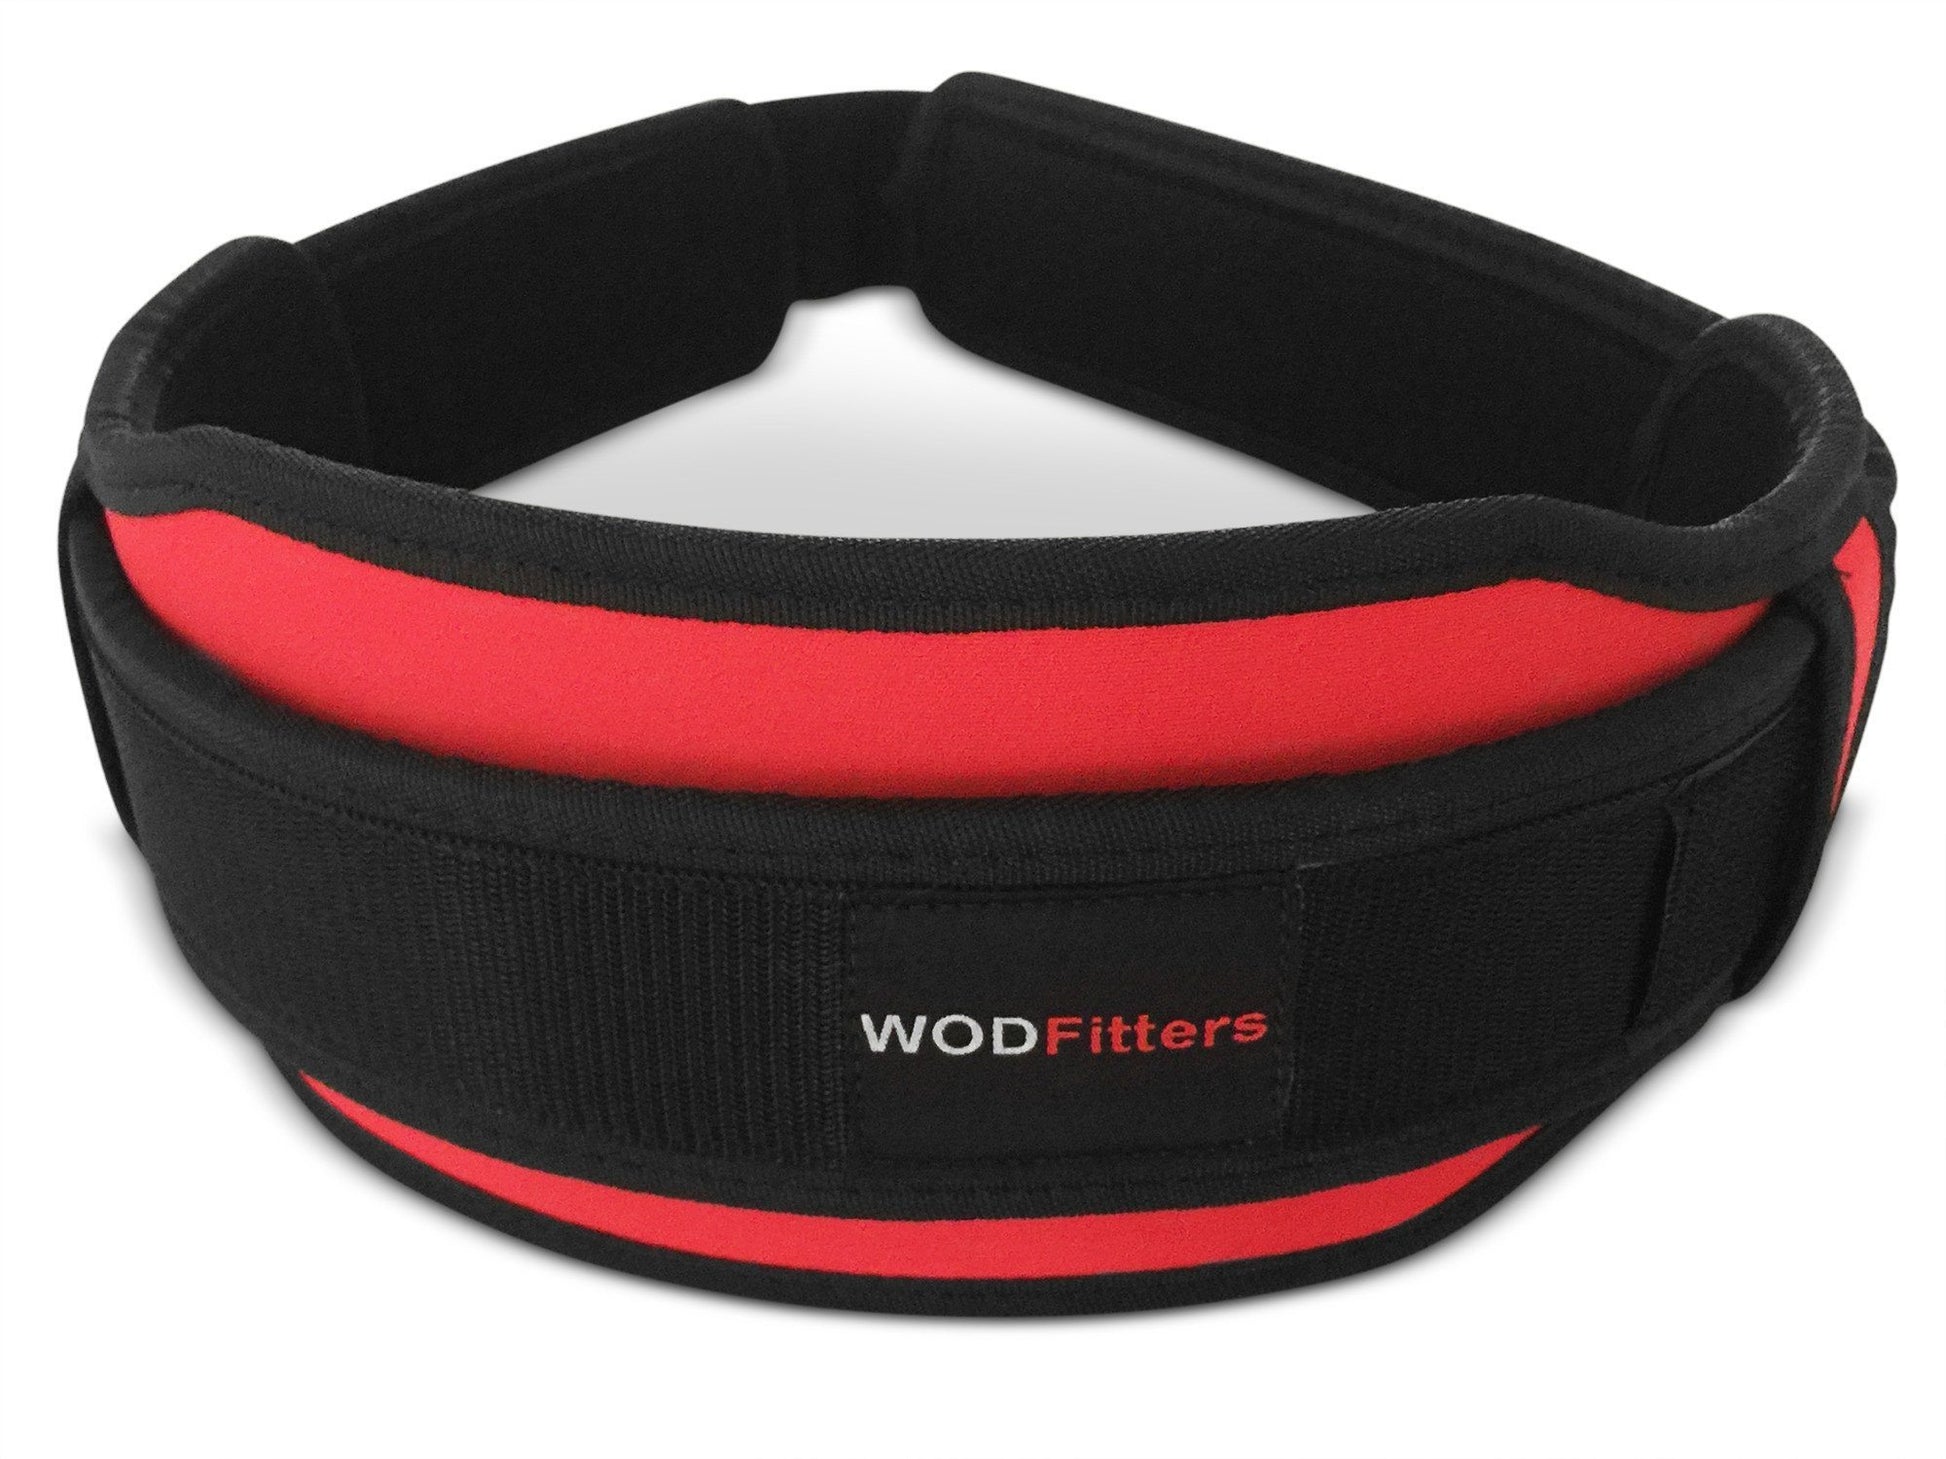 WODFitters Weight Lifting Belt For Men & Women – Premium Quality, Durable, Breathable Material – Lightweight, Adjustable Design 